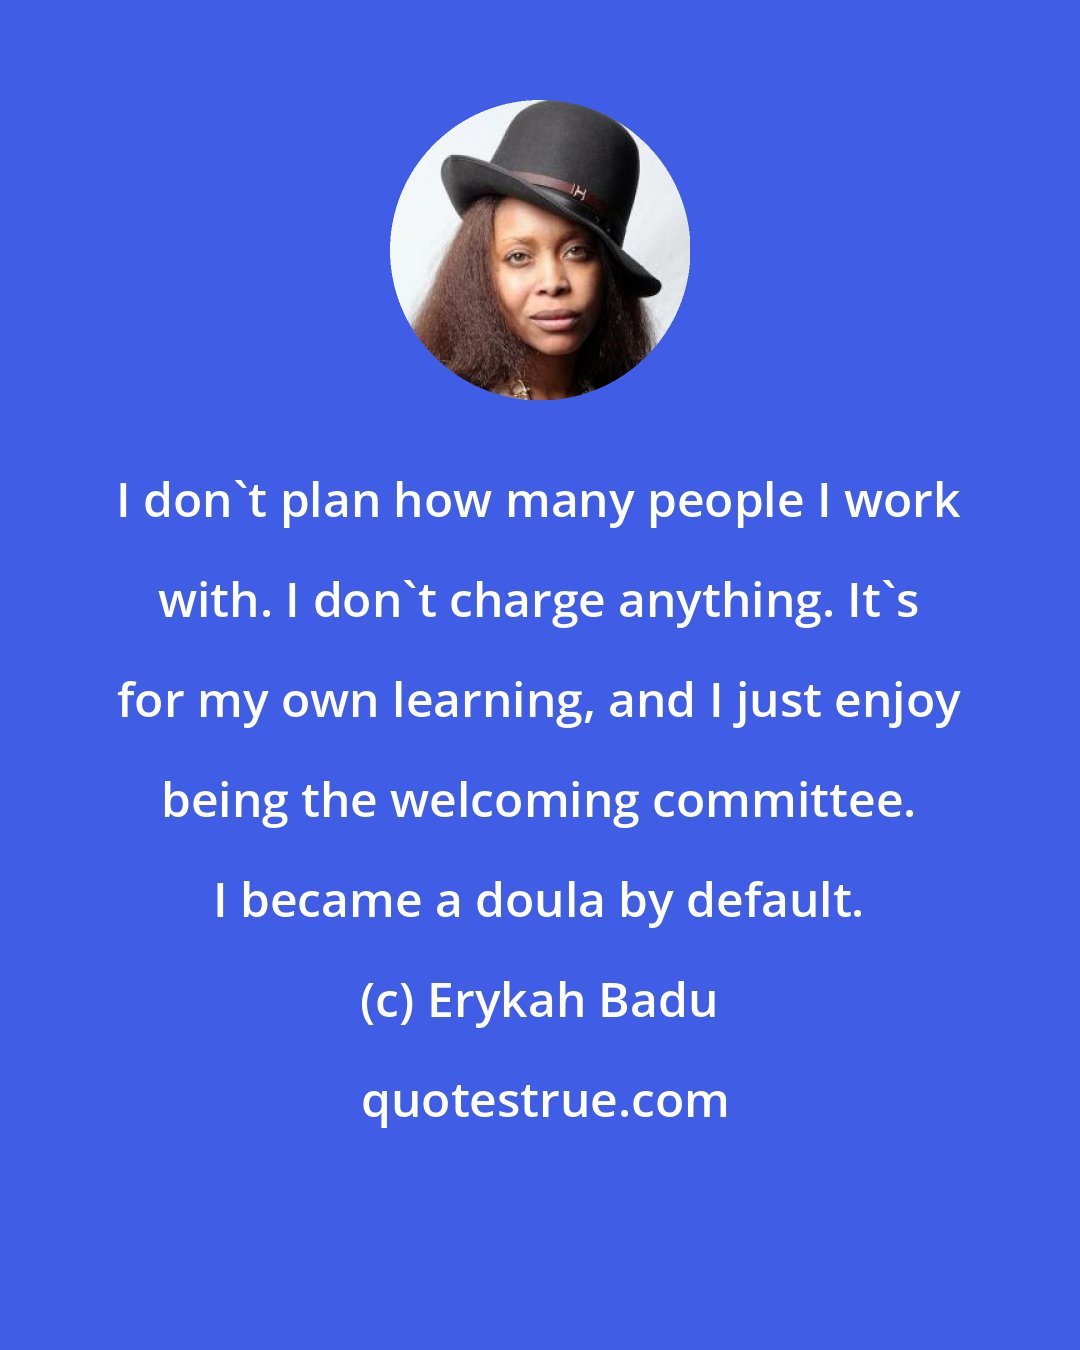 Erykah Badu: I don't plan how many people I work with. I don't charge anything. It's for my own learning, and I just enjoy being the welcoming committee. I became a doula by default.